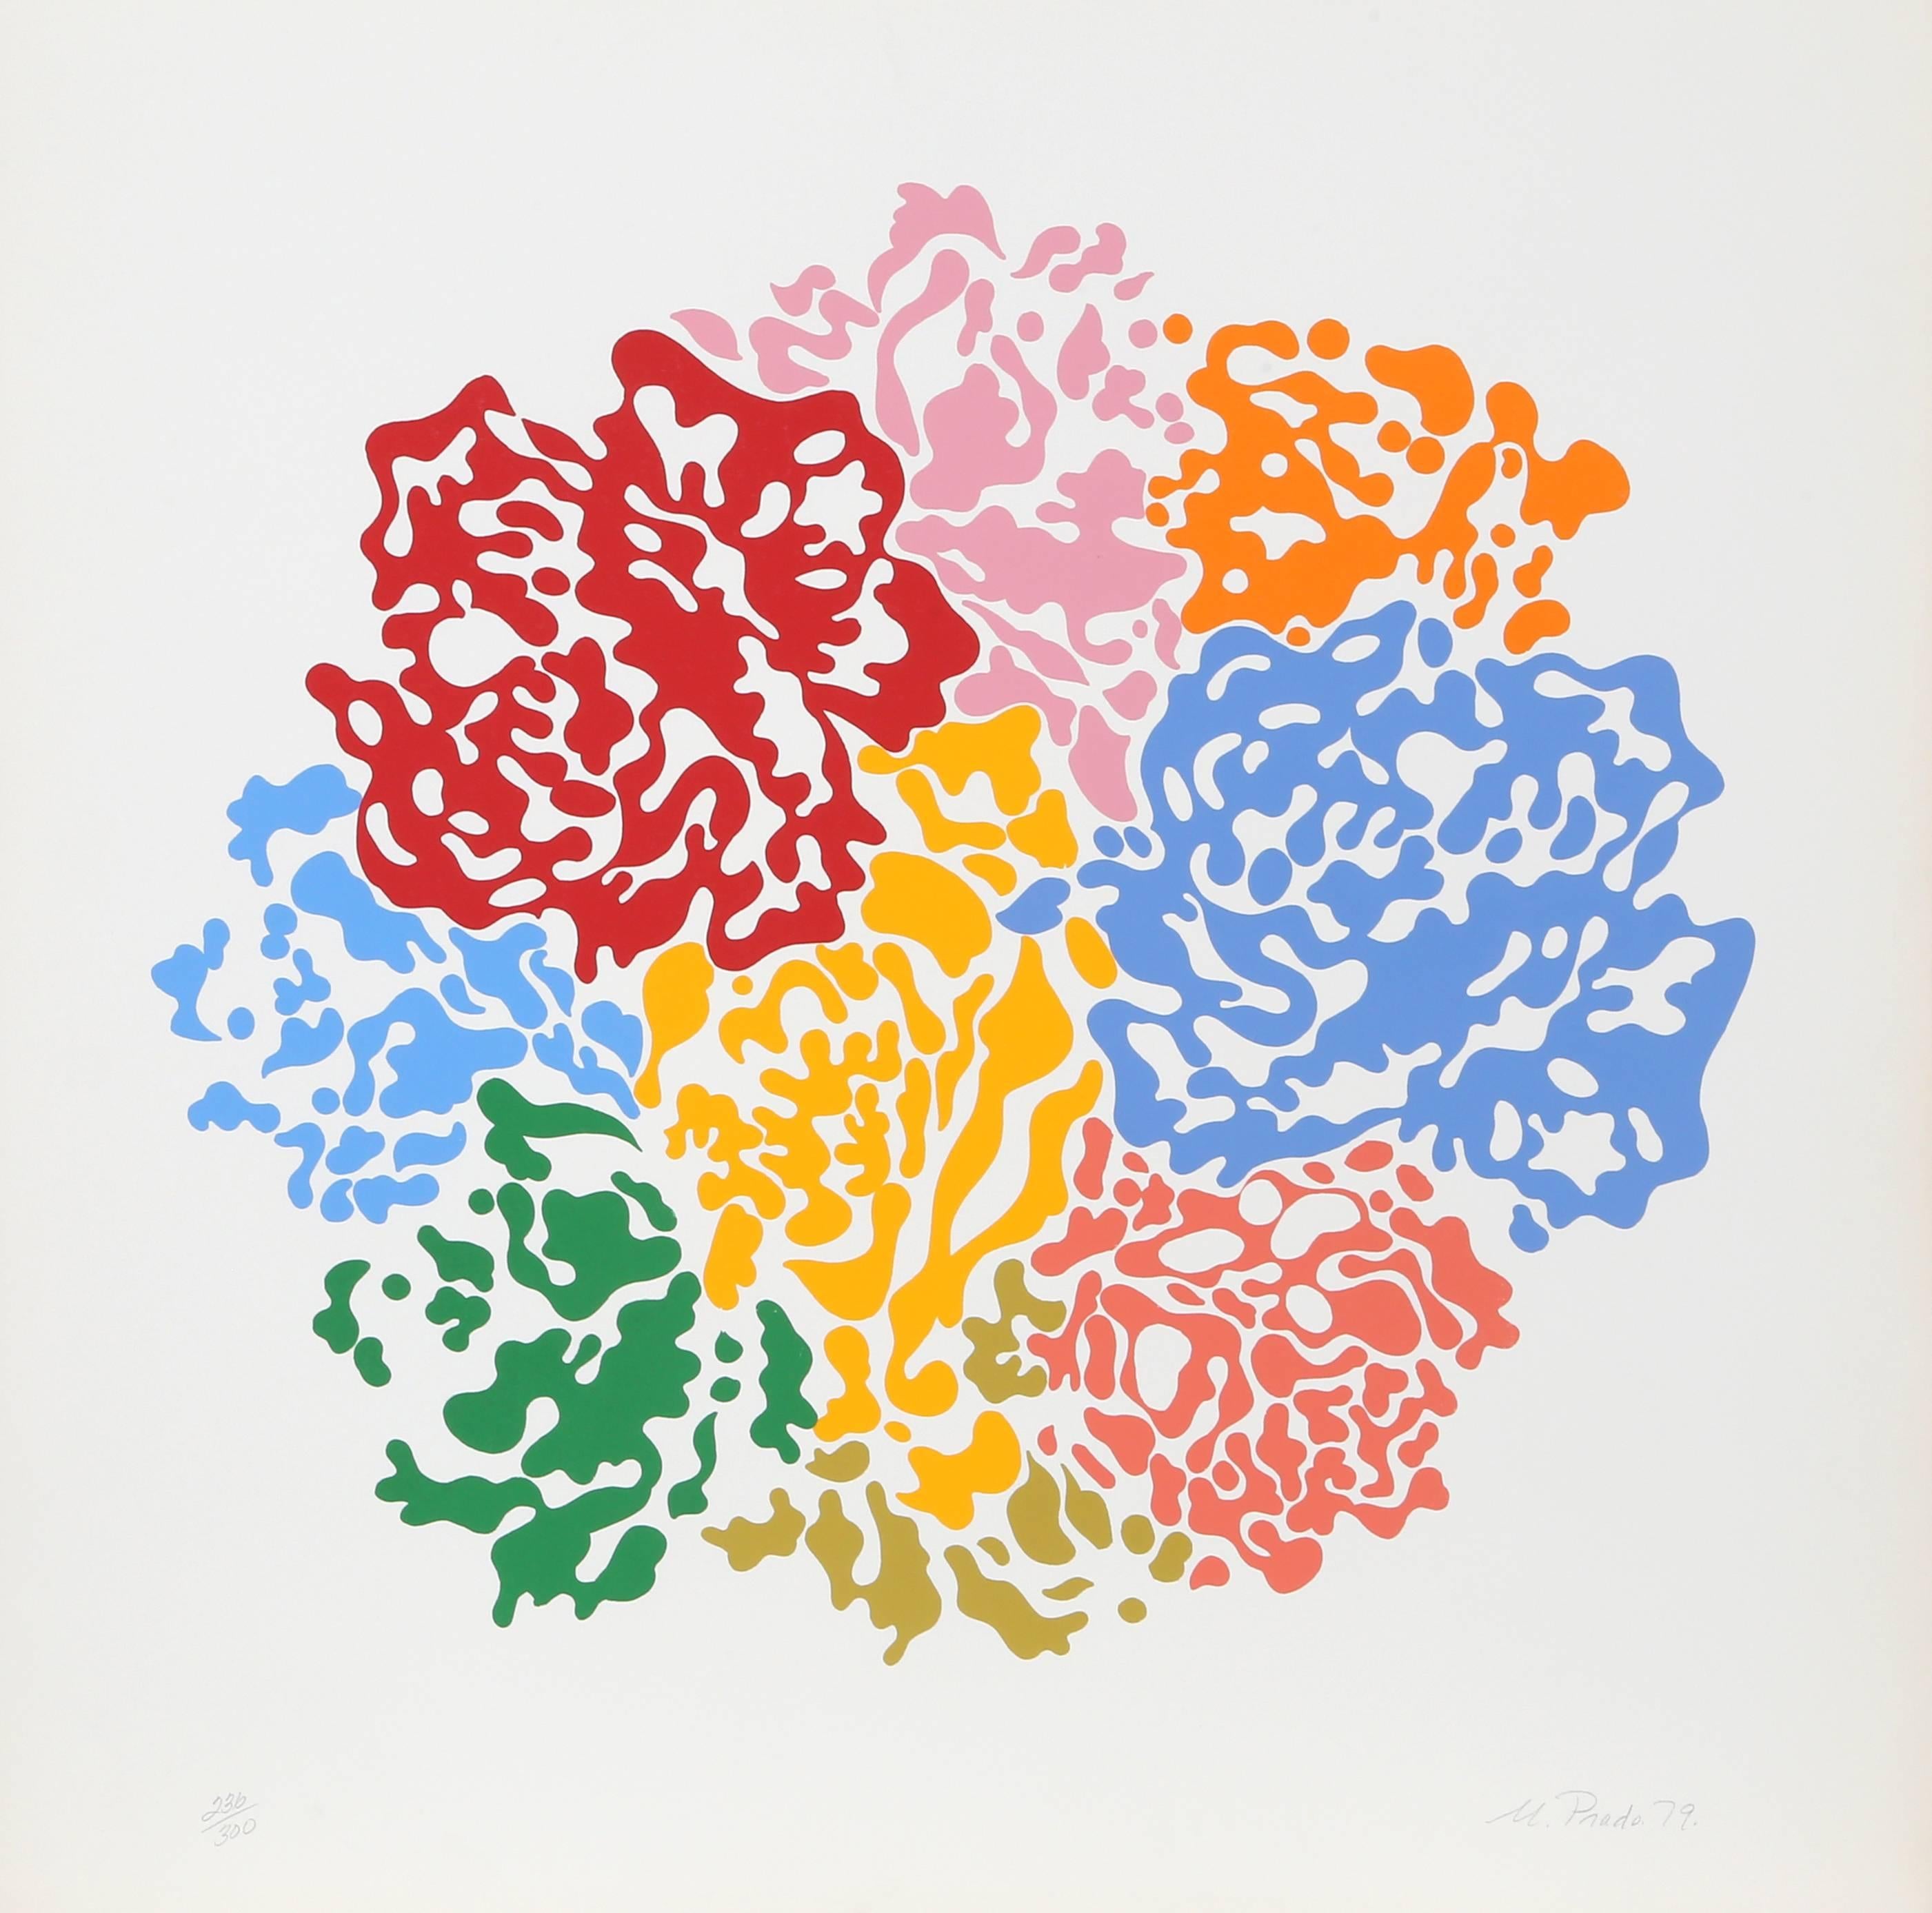 Artist: Nadine Prado
Title: Flower Bouquet
Year: 1979
Medium: Serigraph, signed and numbered in pencil
Edition: 300, 25 AP
Paper Size: 30 in. x 30 in. (76.2 cm x 76.2 cm)